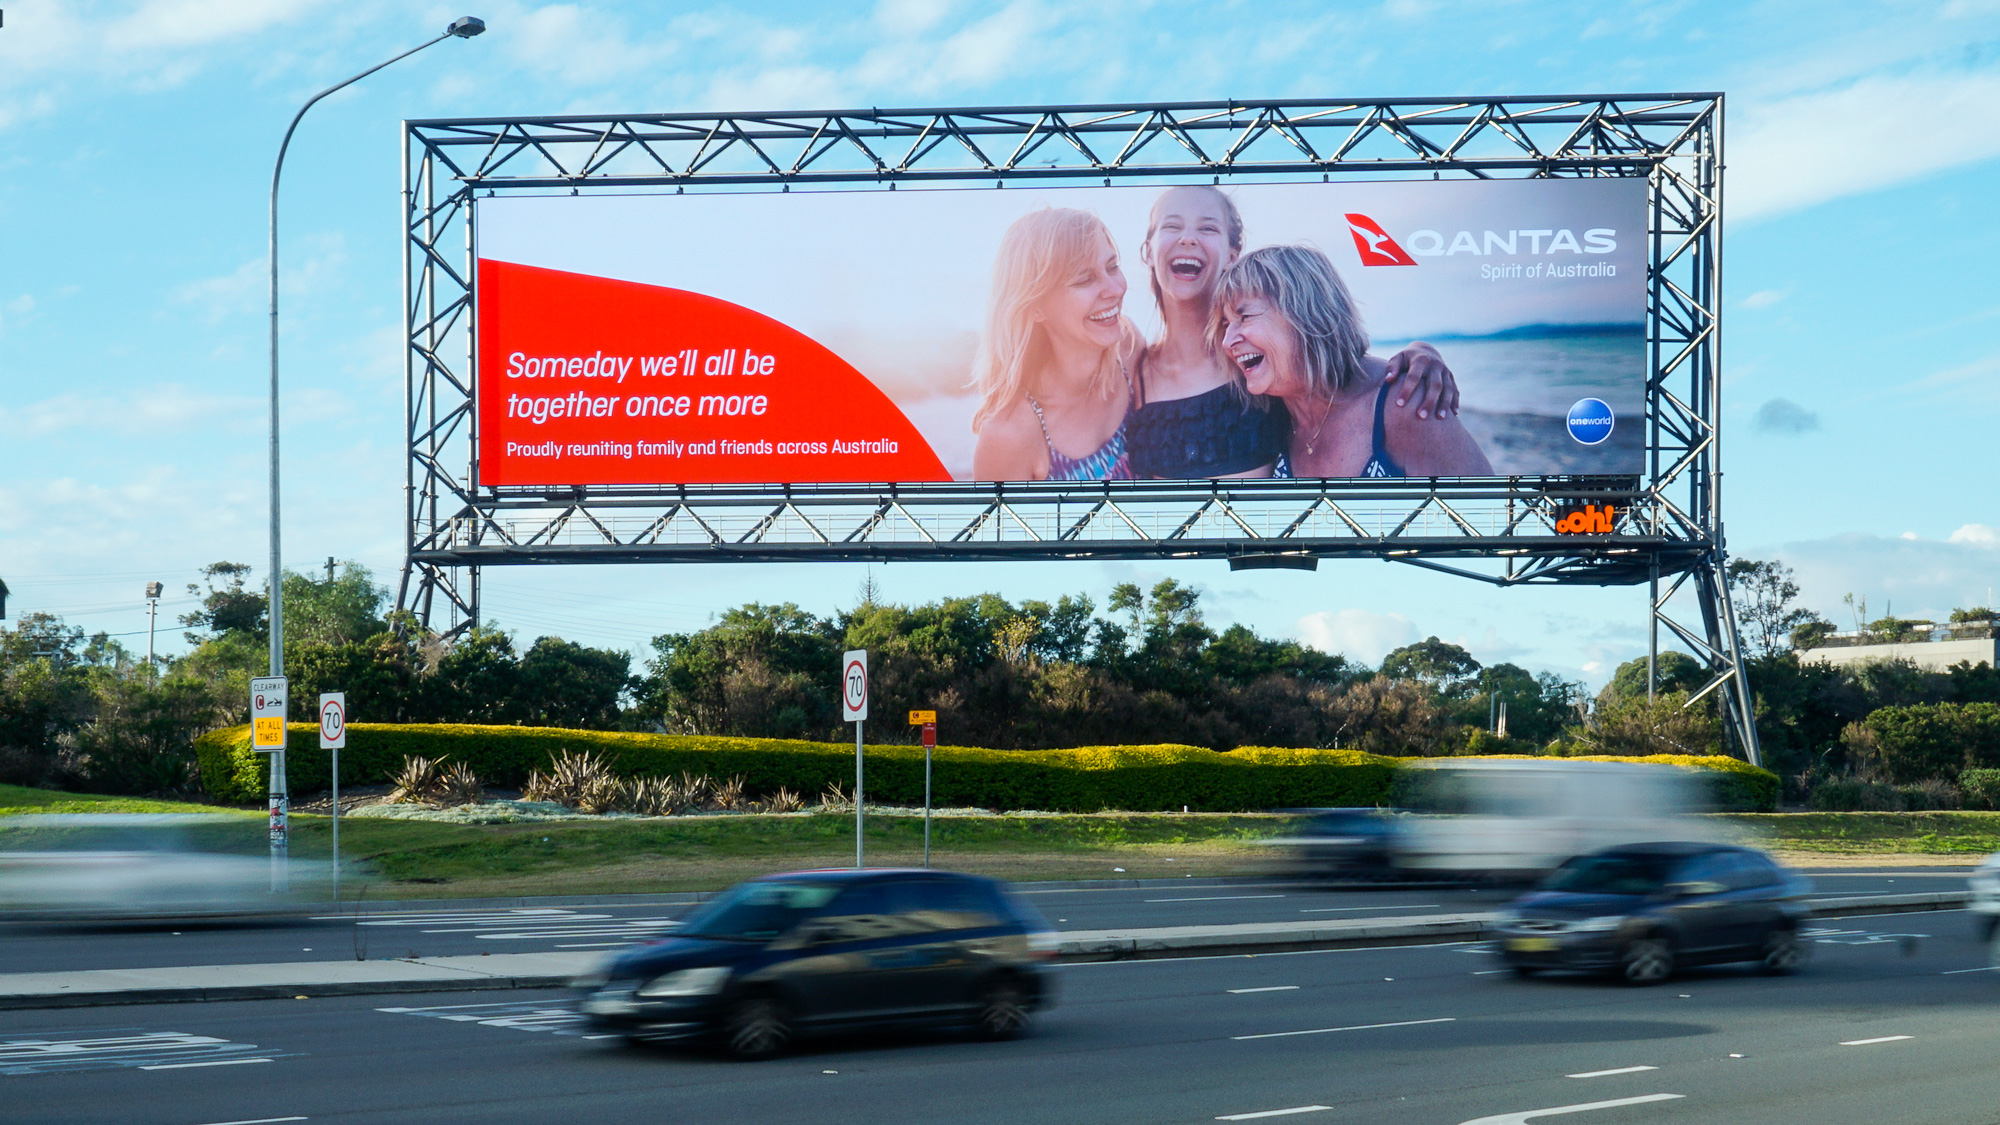 Qantas advertising on billboard in airport and on road